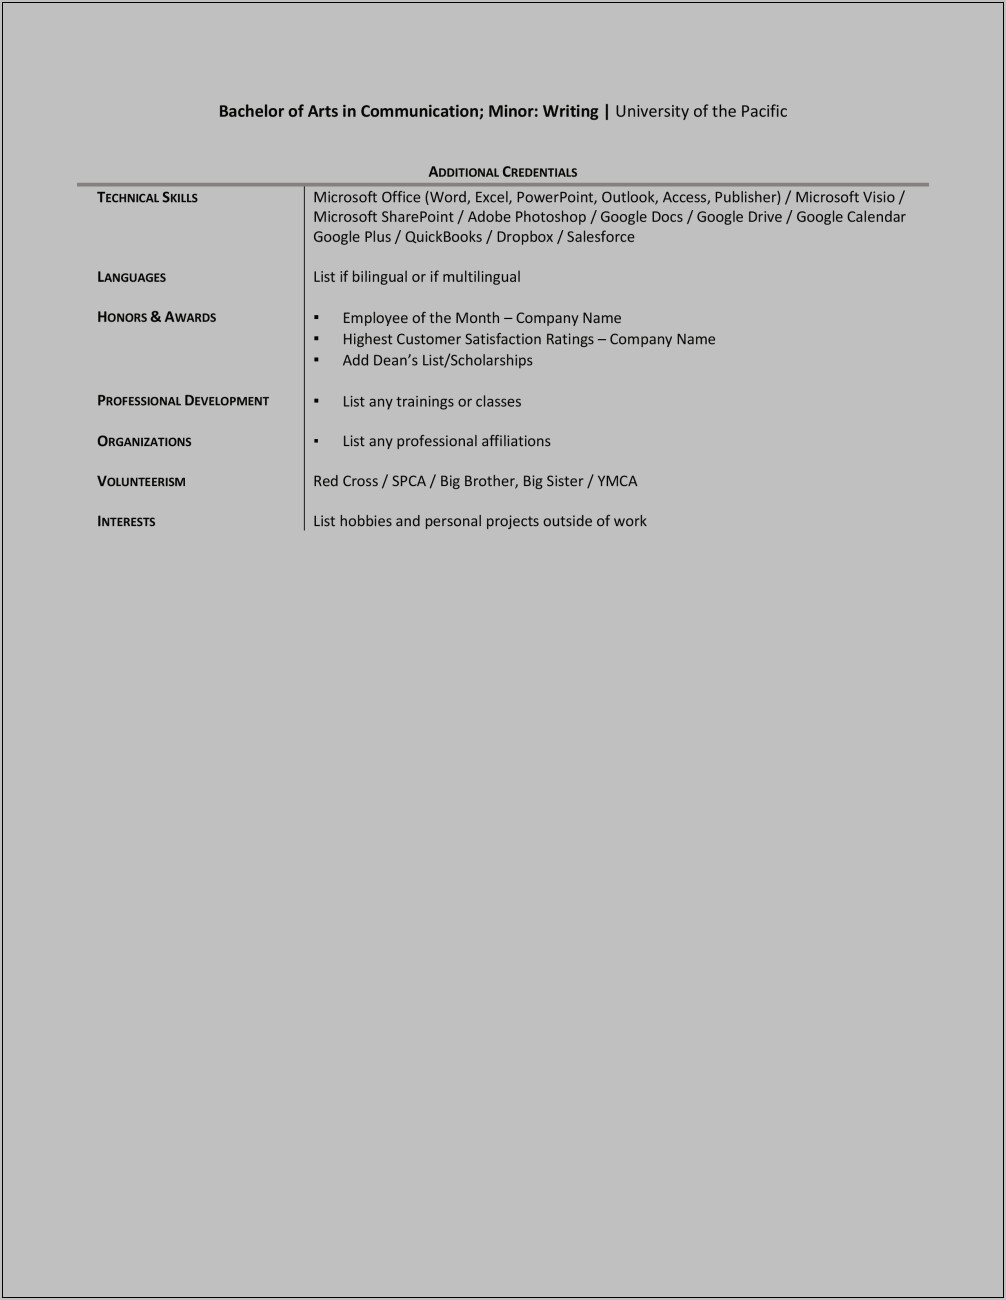 Seo Resume Examples Self Taught